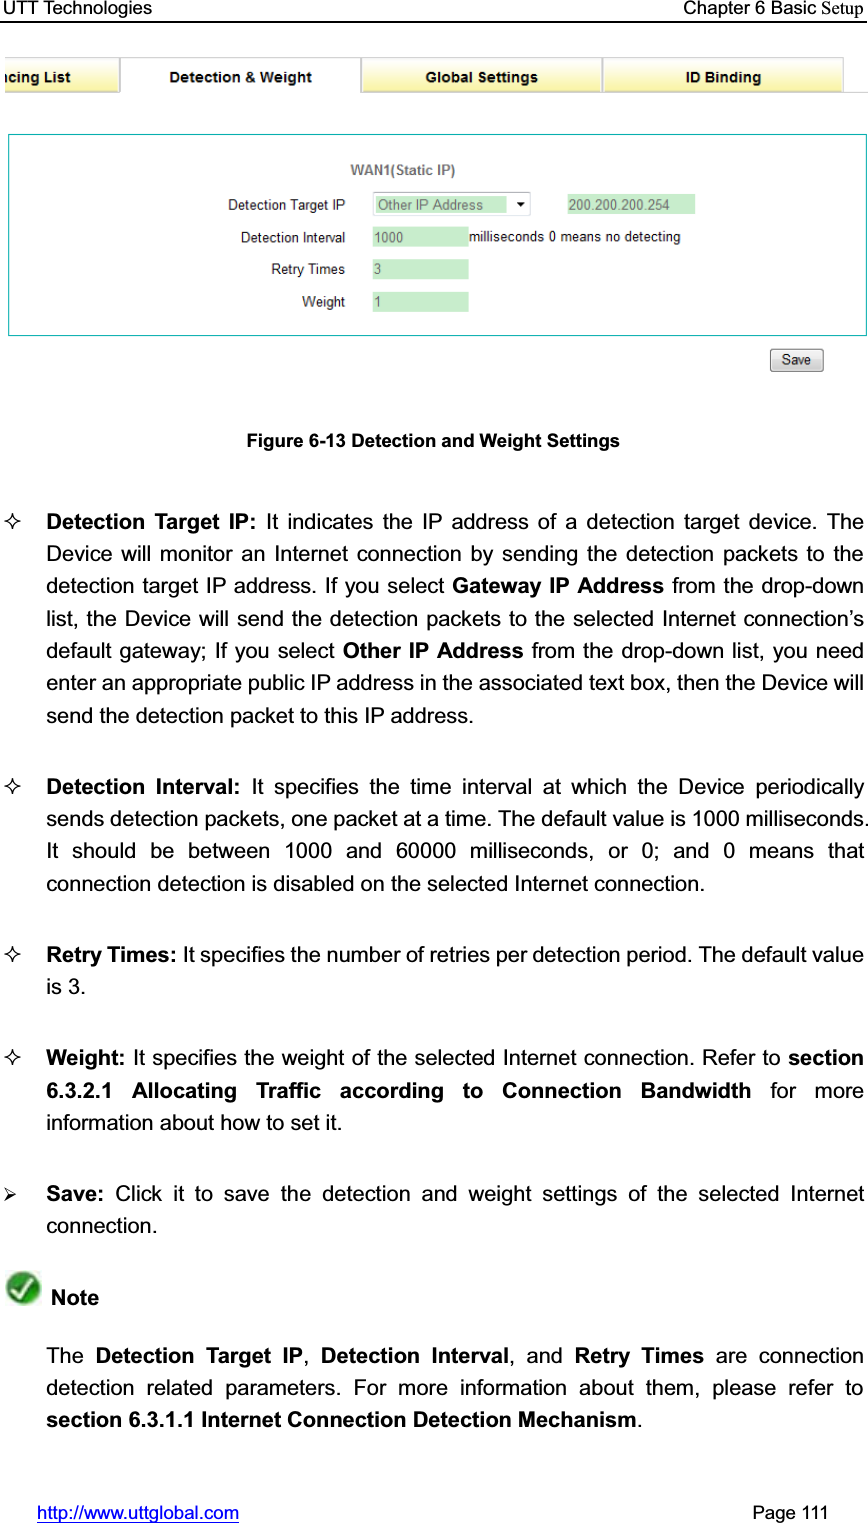 UTT Technologies    Chapter 6 Basic Setuphttp://www.uttglobal.com                                                       Page 111 Figure 6-13 Detection and Weight Settings Detection Target IP: It indicates the IP address of a detection target device. The Device will monitor an Internet connection by sending the detection packets to the detection target IP address. If you select Gateway IP Address from the drop-down list, the Device will send the detection packets to the selected Internet connection¶sdefault gateway; If you select Other IP Address from the drop-down list, you need enter an appropriate public IP address in the associated text box, then the Device will send the detection packet to this IP address. Detection Interval: It specifies the time interval at which the Device periodically sends detection packets, one packet at a time. The default value is 1000 milliseconds. It should be between 1000 and 60000 milliseconds, or 0; and 0 means that connection detection is disabled on the selected Internet connection.   Retry Times: It specifies the number of retries per detection period. The default value is 3. Weight: It specifies the weight of the selected Internet connection. Refer to section 6.3.2.1 Allocating Traffic according to Connection Bandwidth for more information about how to set it.   ¾Save:  Click it to save the detection and weight settings of the selected Internet connection.NoteThe Detection Target IP, Detection Interval, and Retry Times are connection detection related parameters. For more information about them, please refer to section 6.3.1.1 Internet Connection Detection Mechanism.